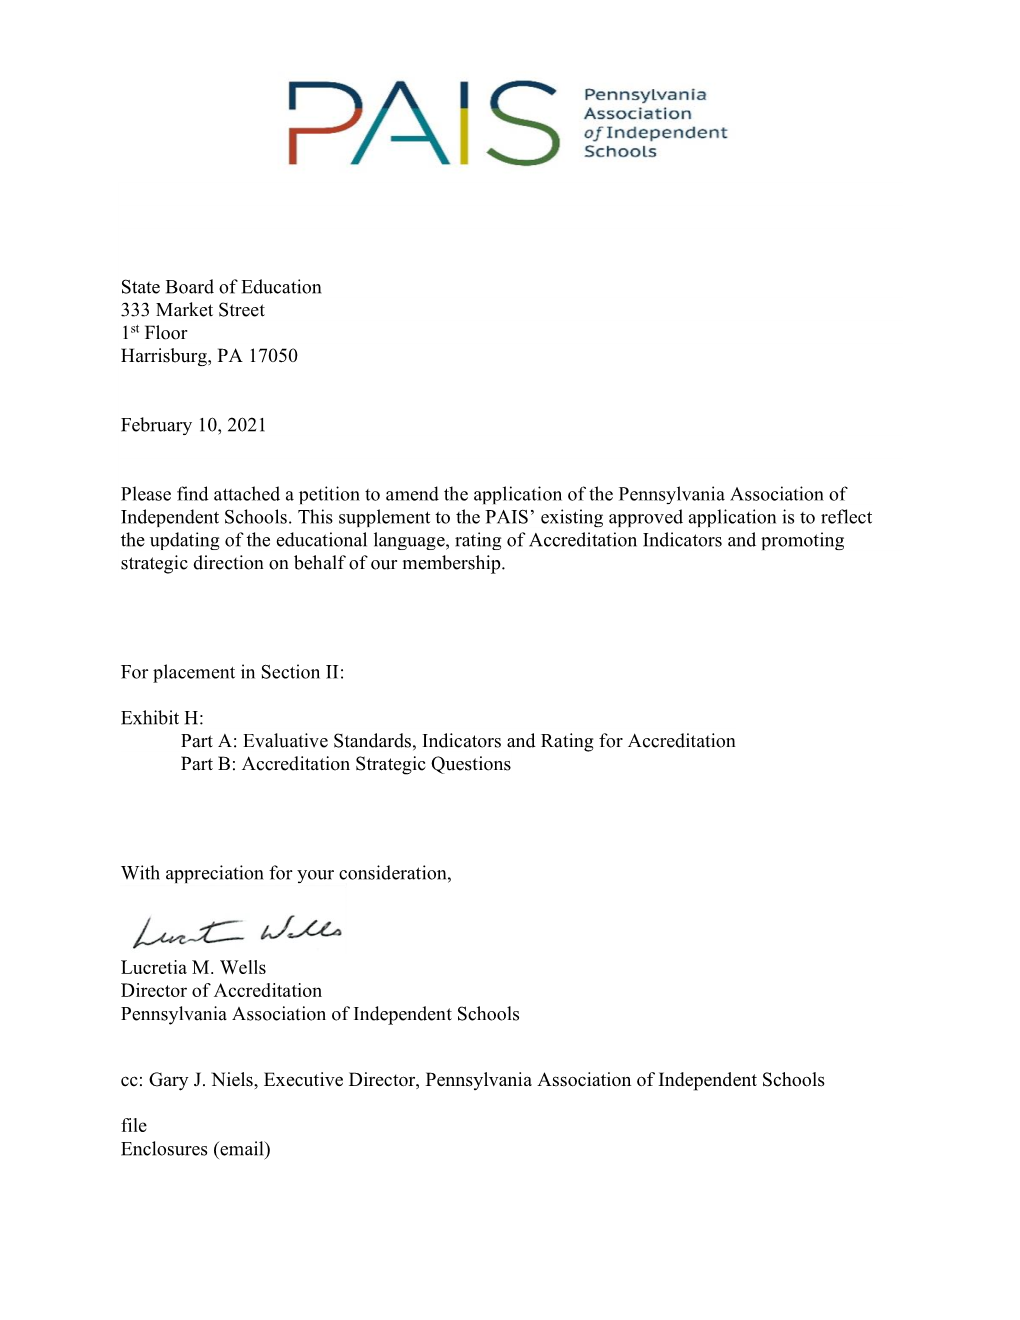 Petition of the Pennsylvania Association of Independent Schools